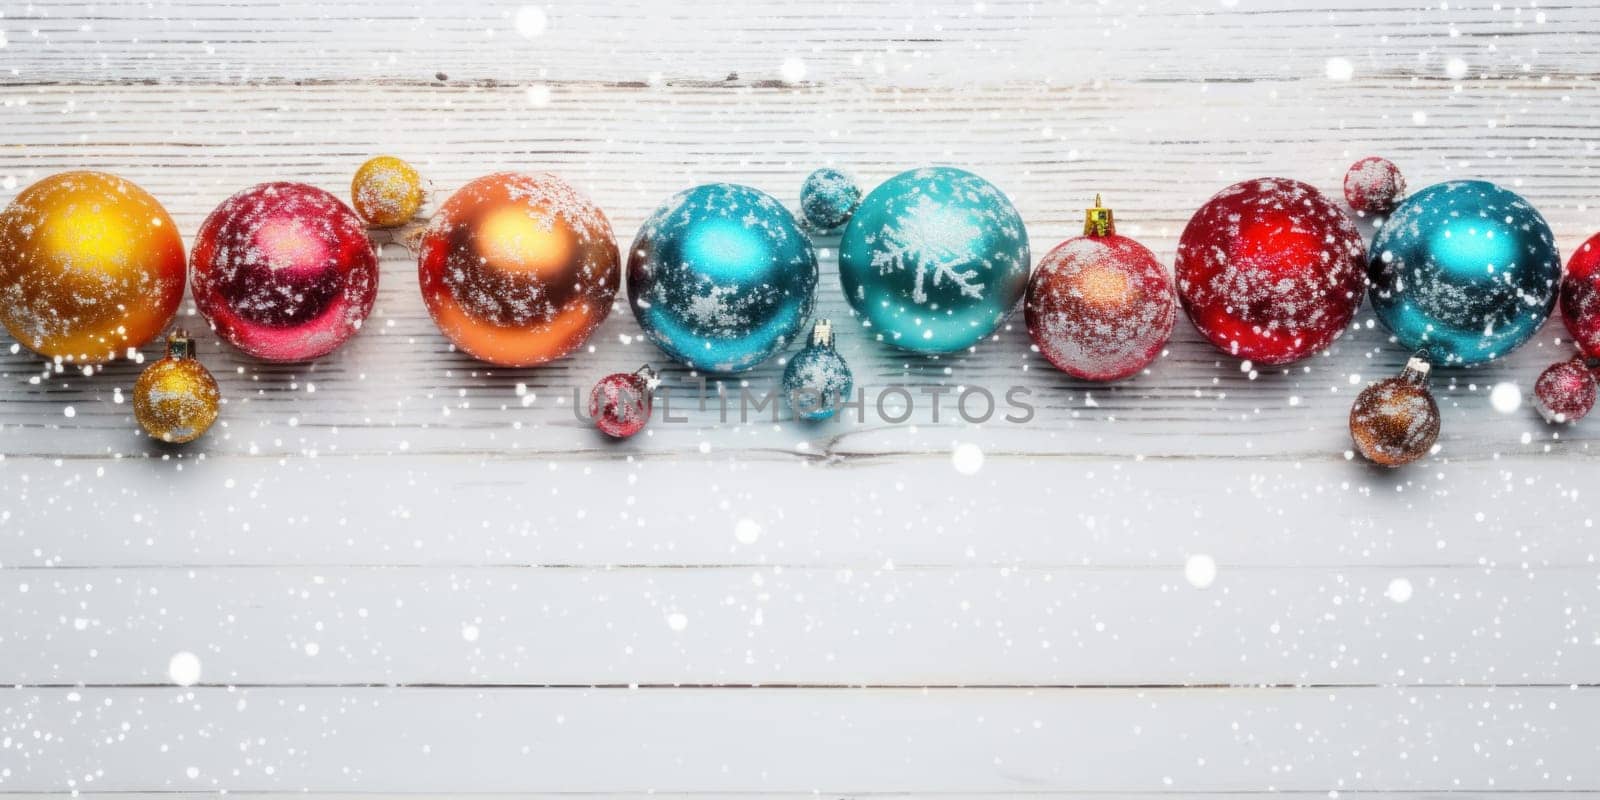 A row of colorful christmas ornaments on a wooden surface